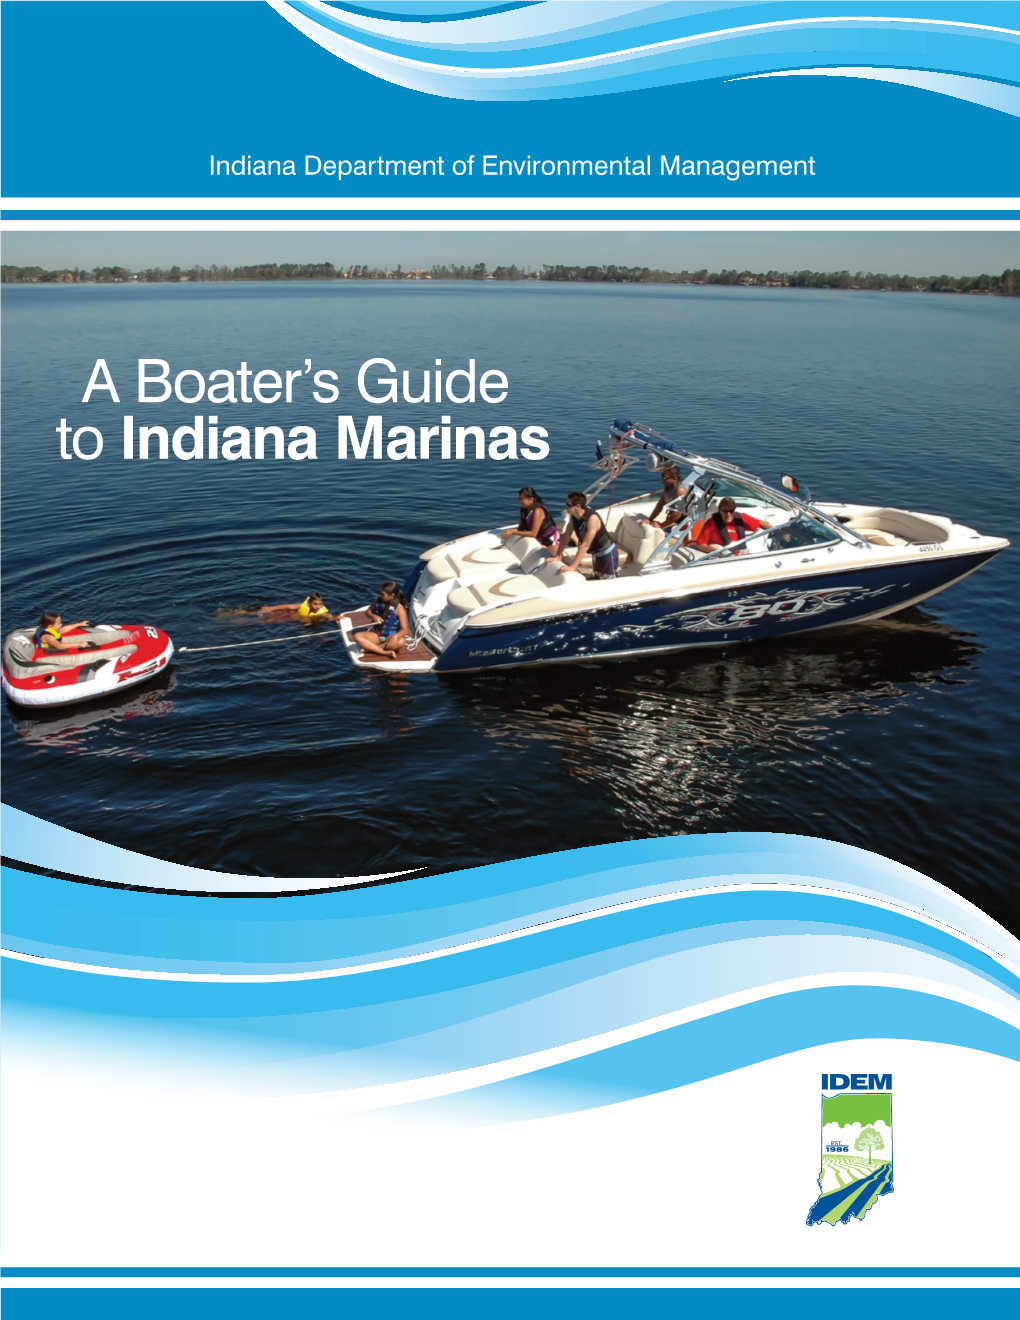 A Boater's Guide to Indiana Marinas